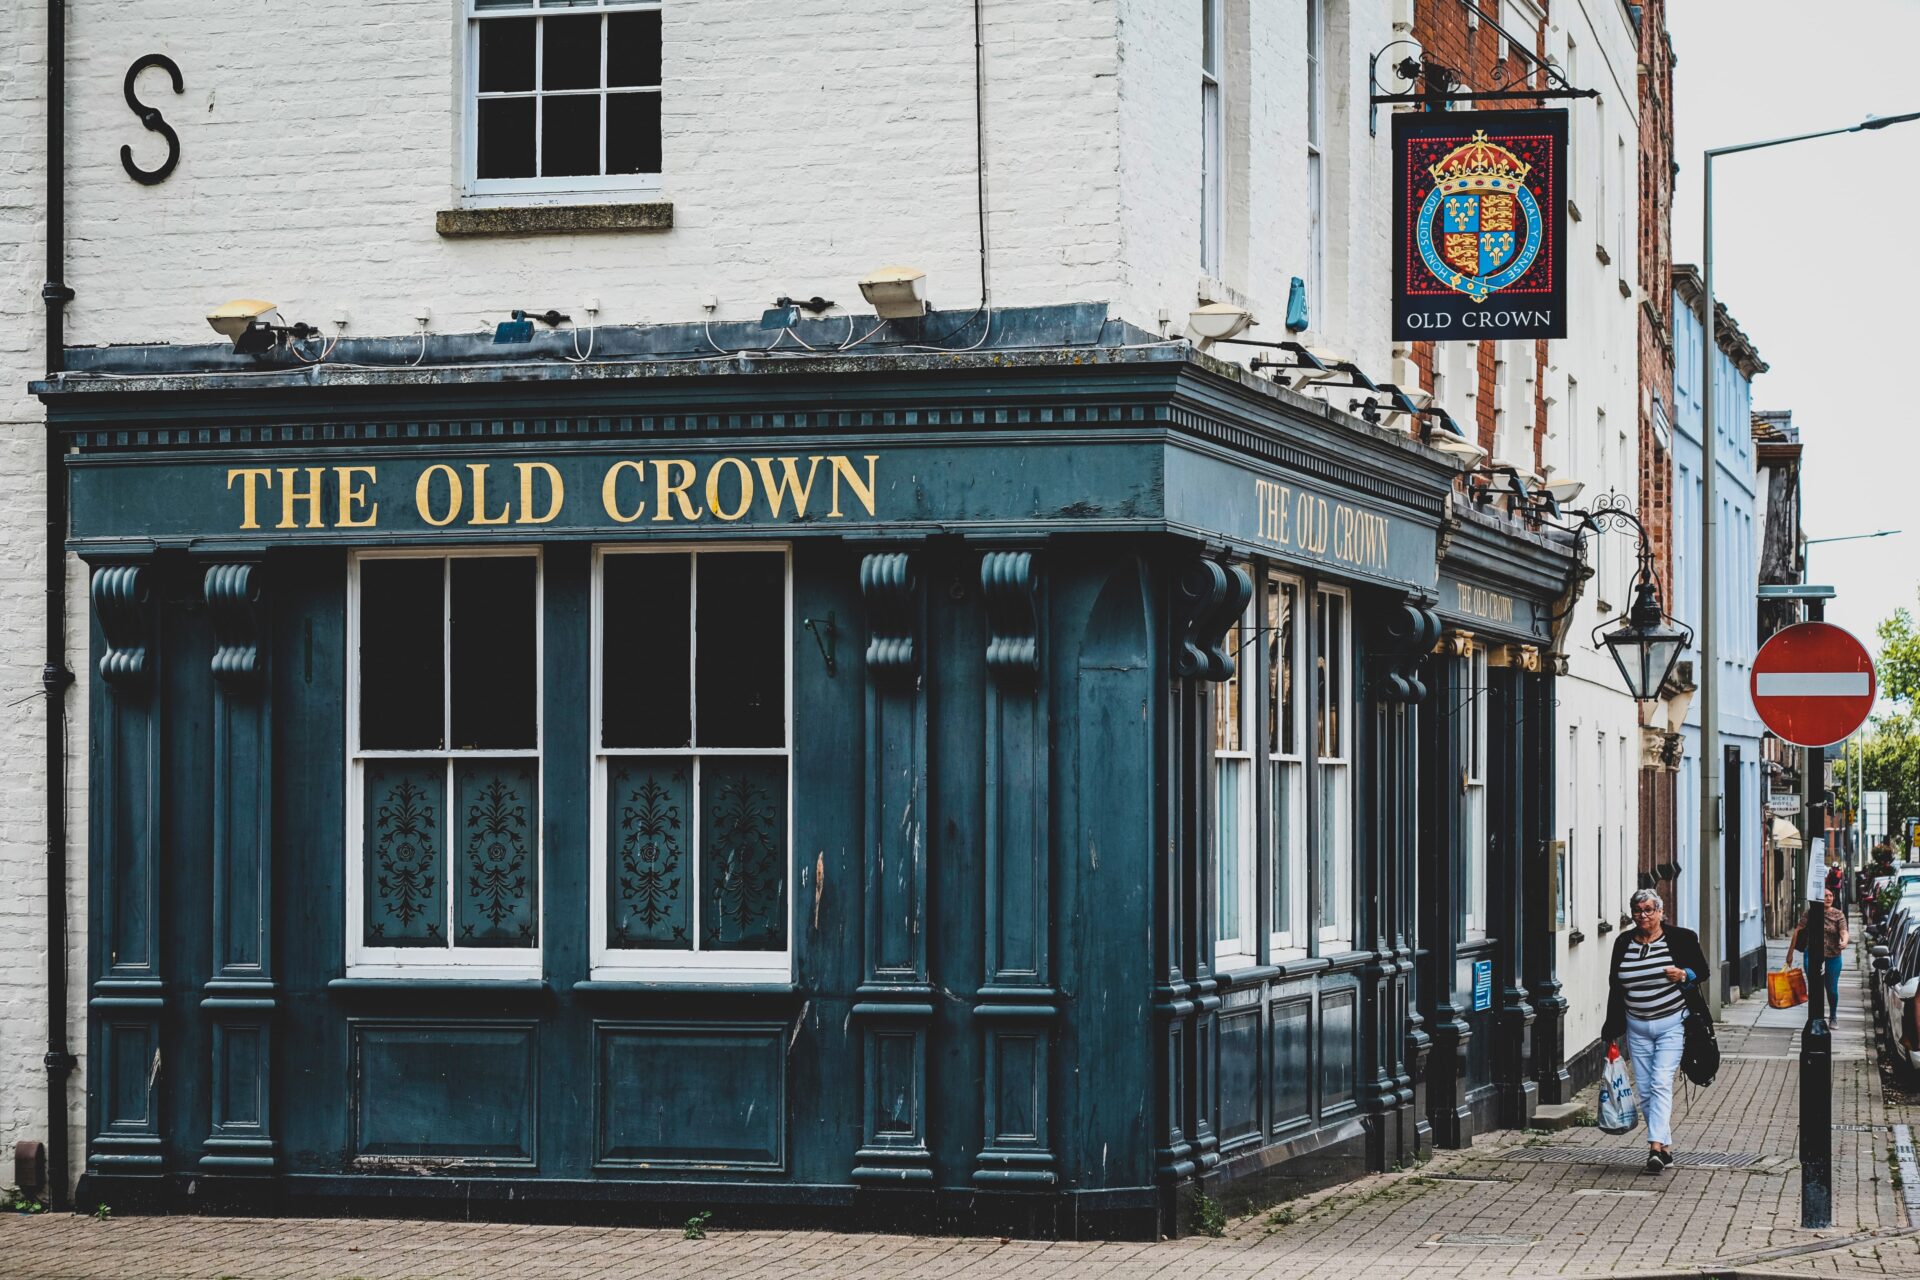 The Old Crown store